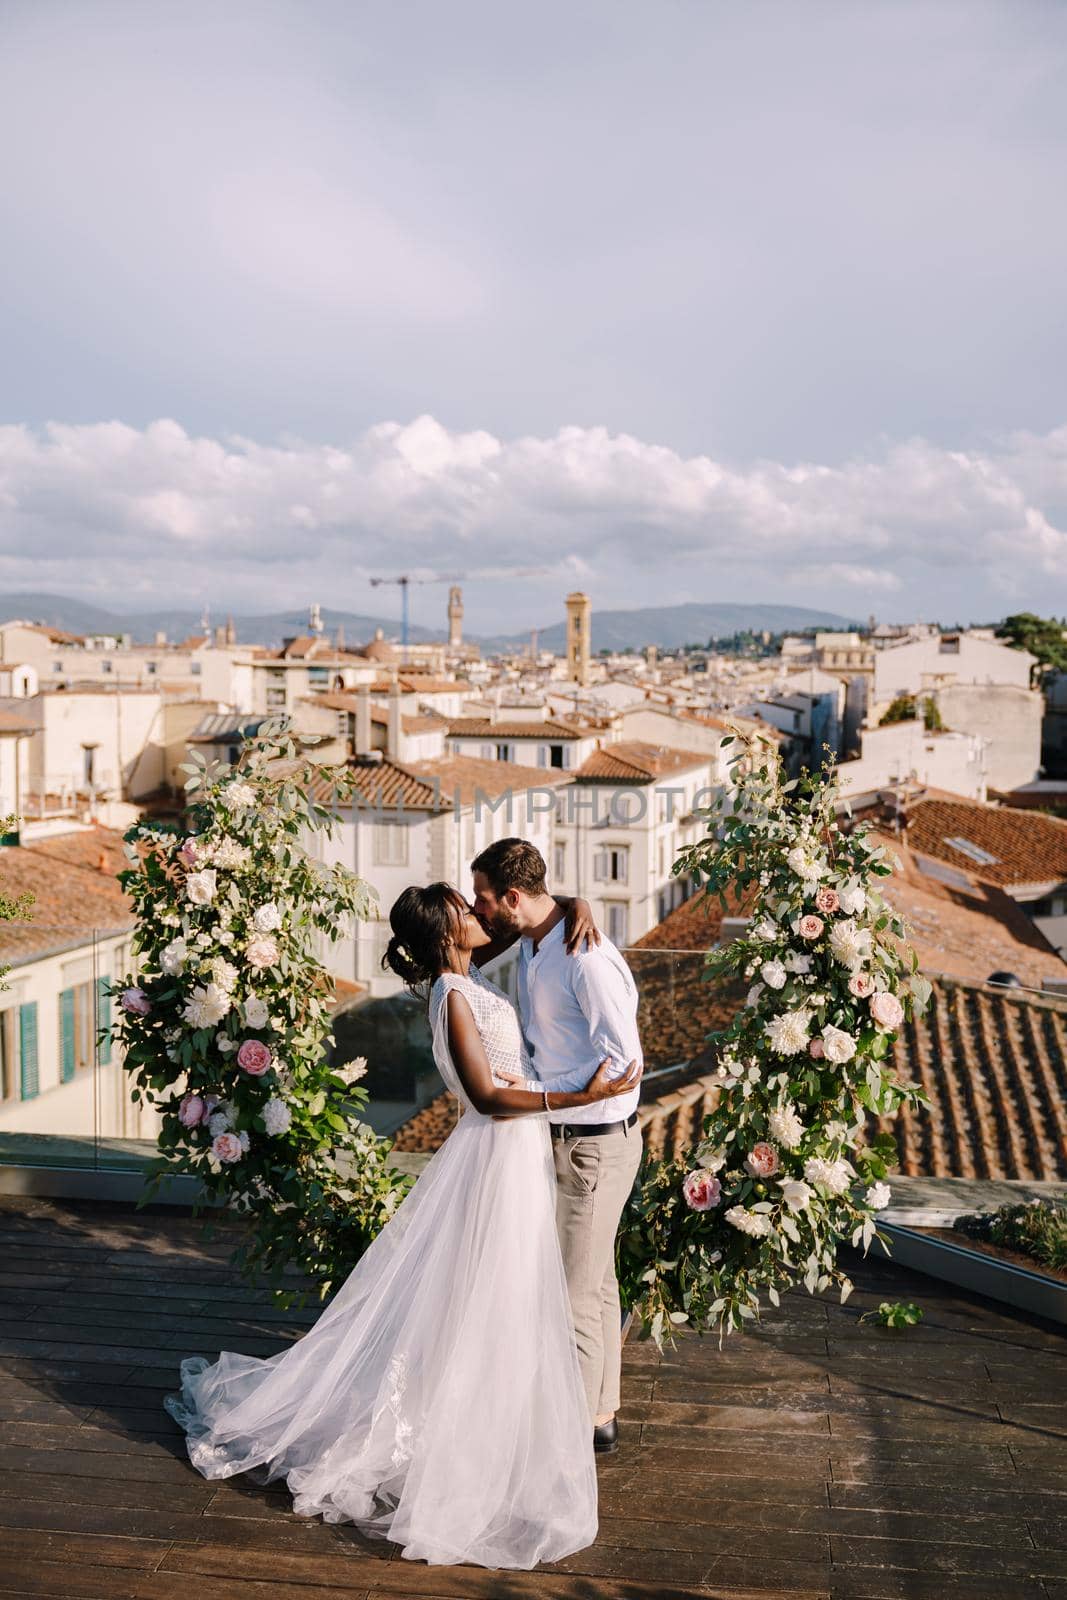 Interracial wedding couple. Destination fine-art wedding in Florence, Italy. A wedding ceremony on the roof of the building, with cityscape views of the city and the Cathedral of Santa Maria Del Fiore by Nadtochiy